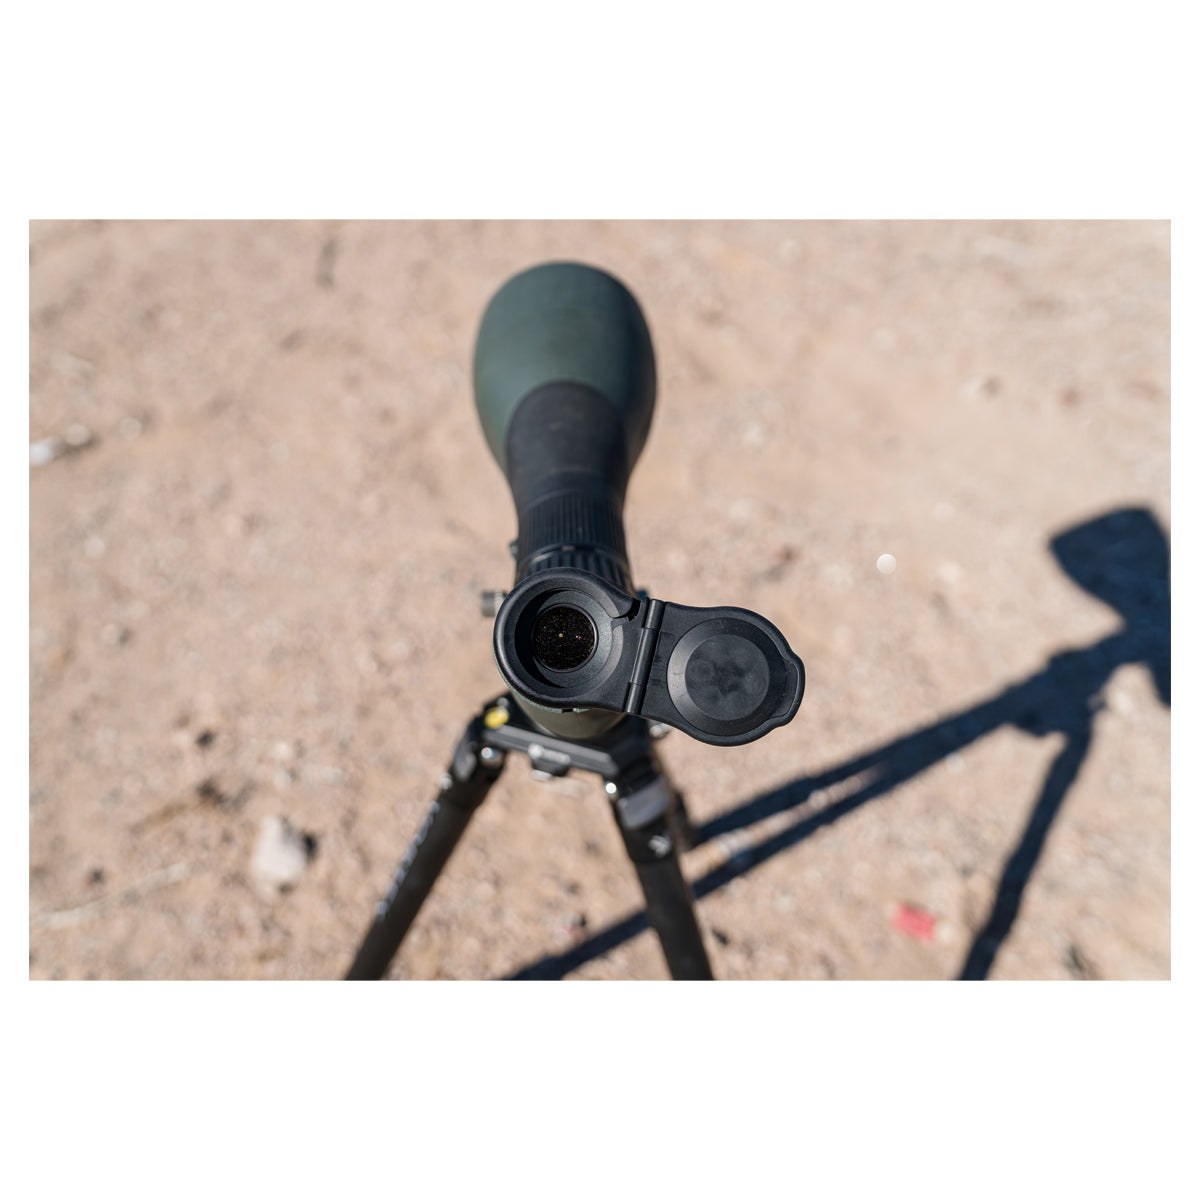 Magview S1 Spotting Scope System